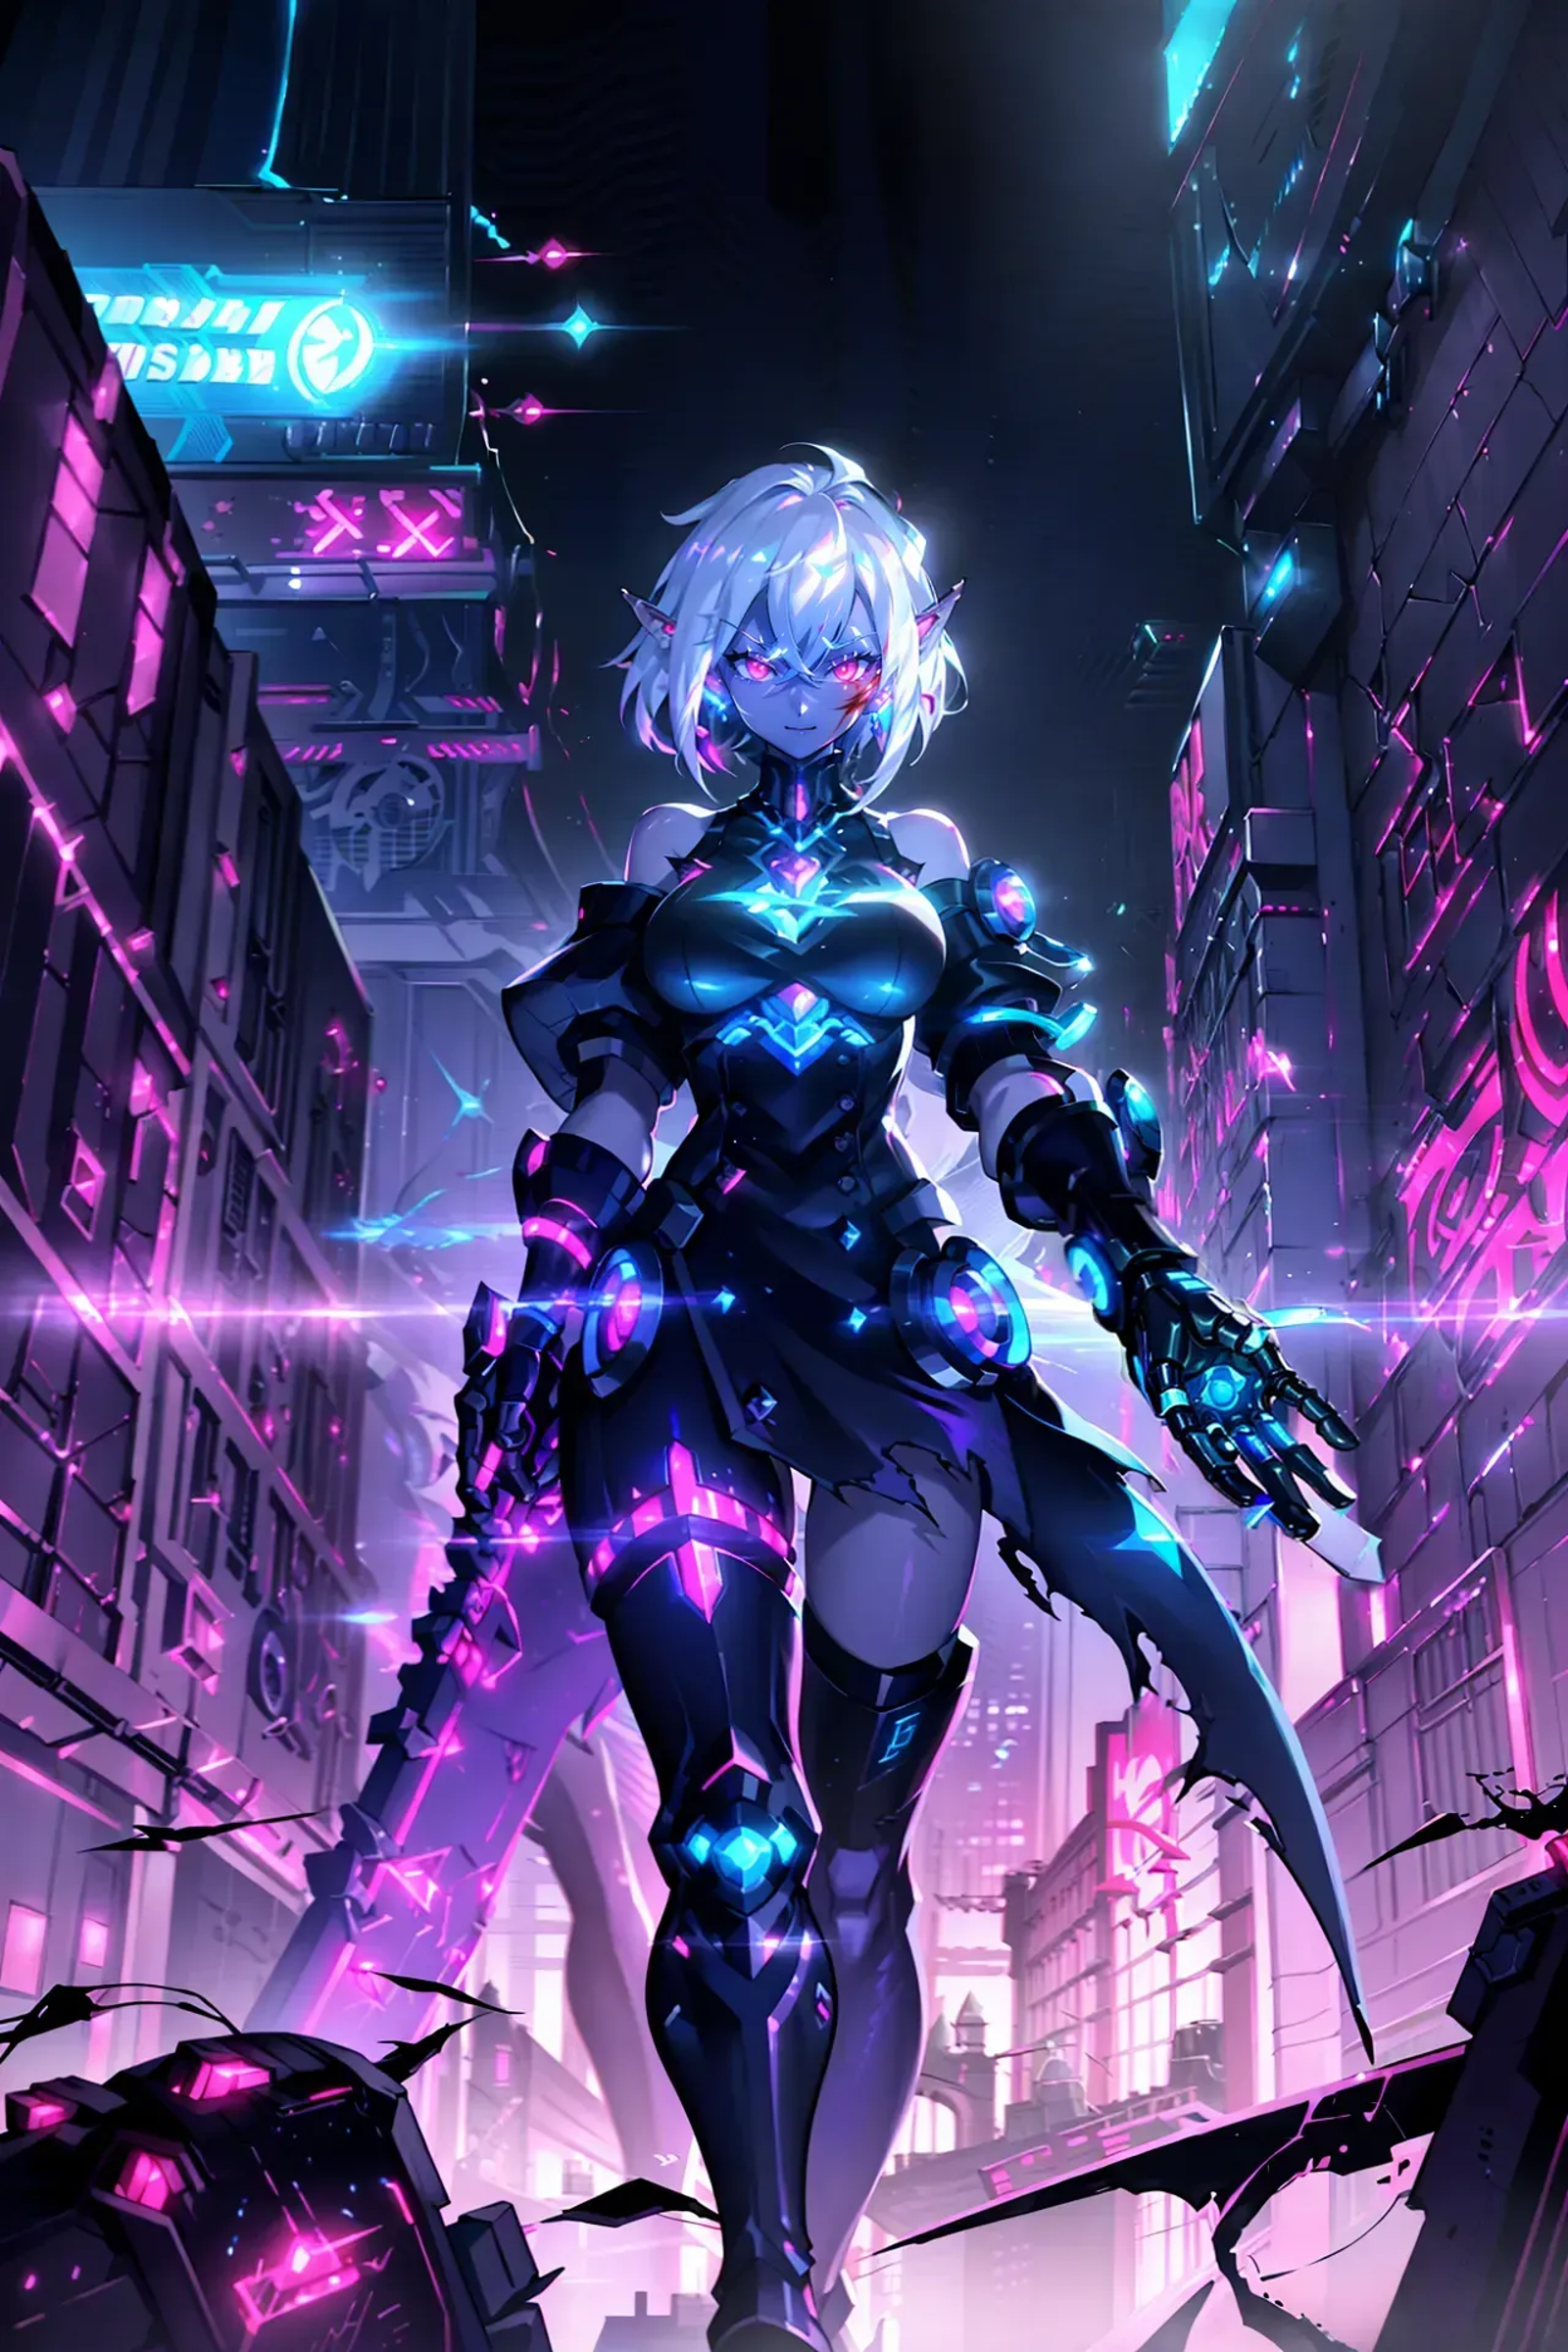 Anime-style female character with purple hair and a long tail, holding a gun in a futuristic city.